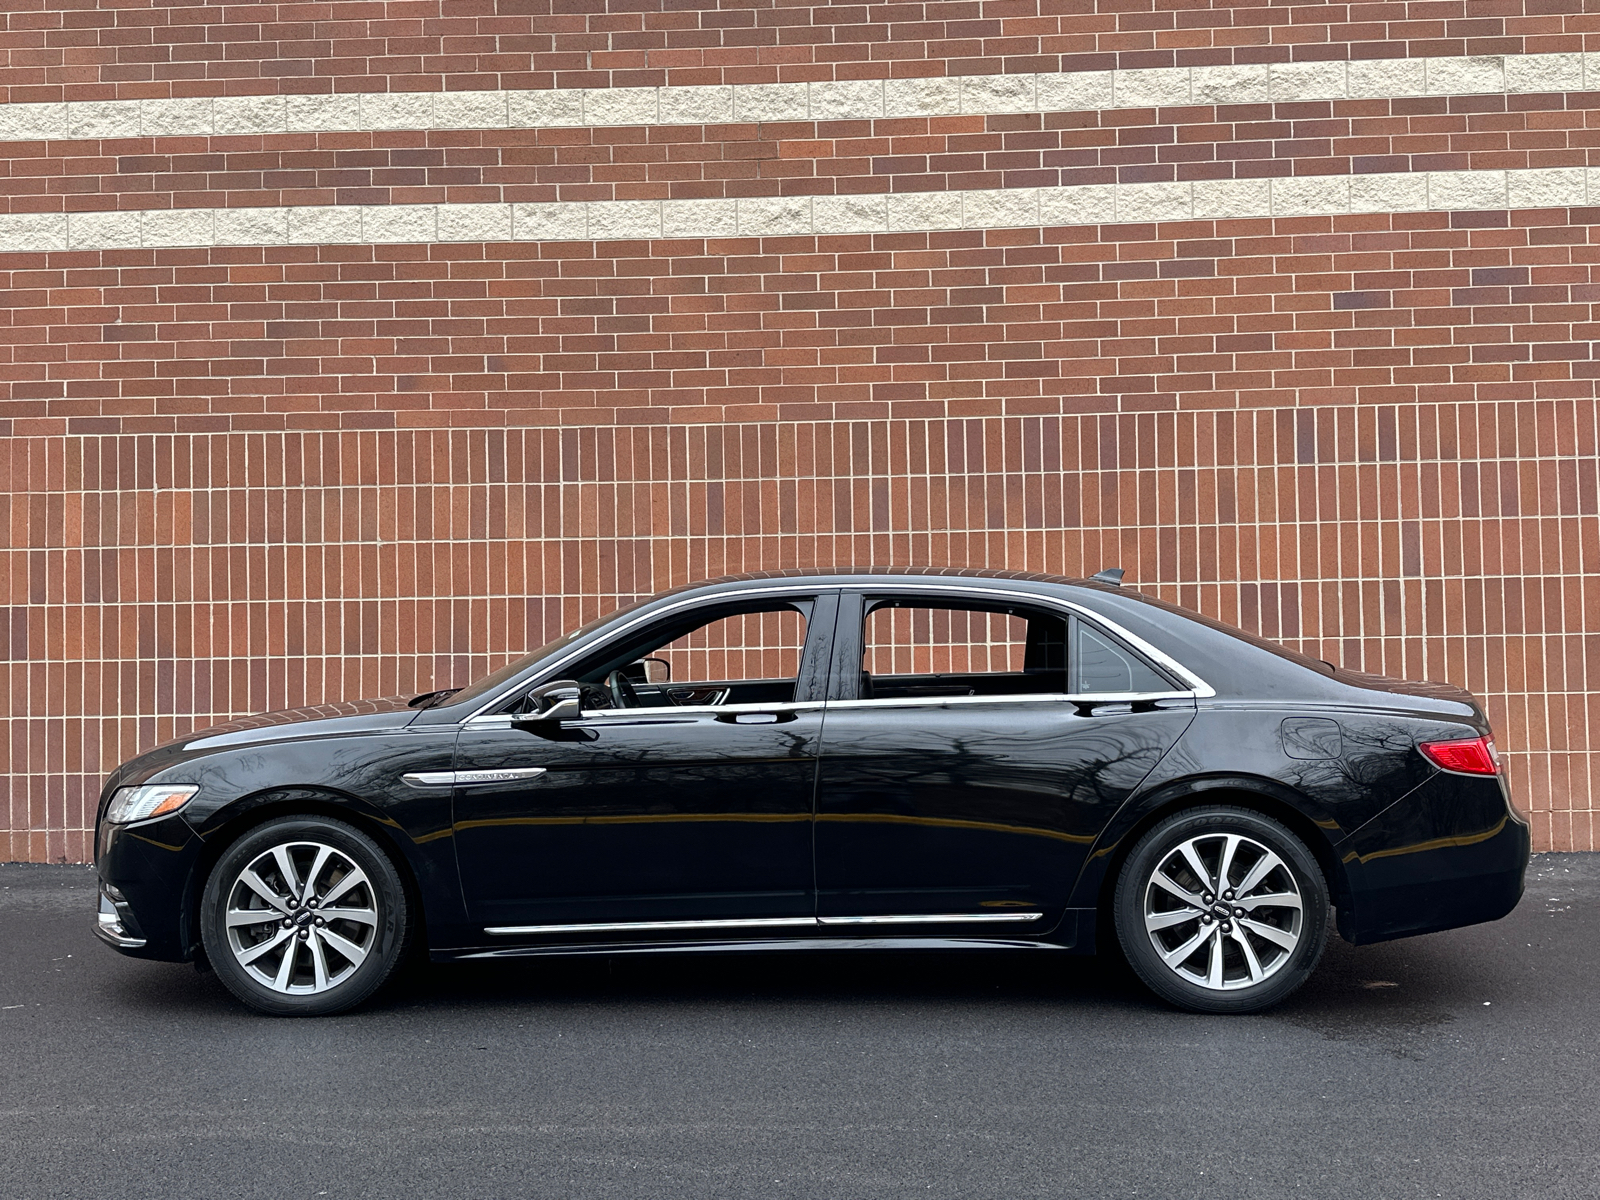 2019 Lincoln Continental Livery 1